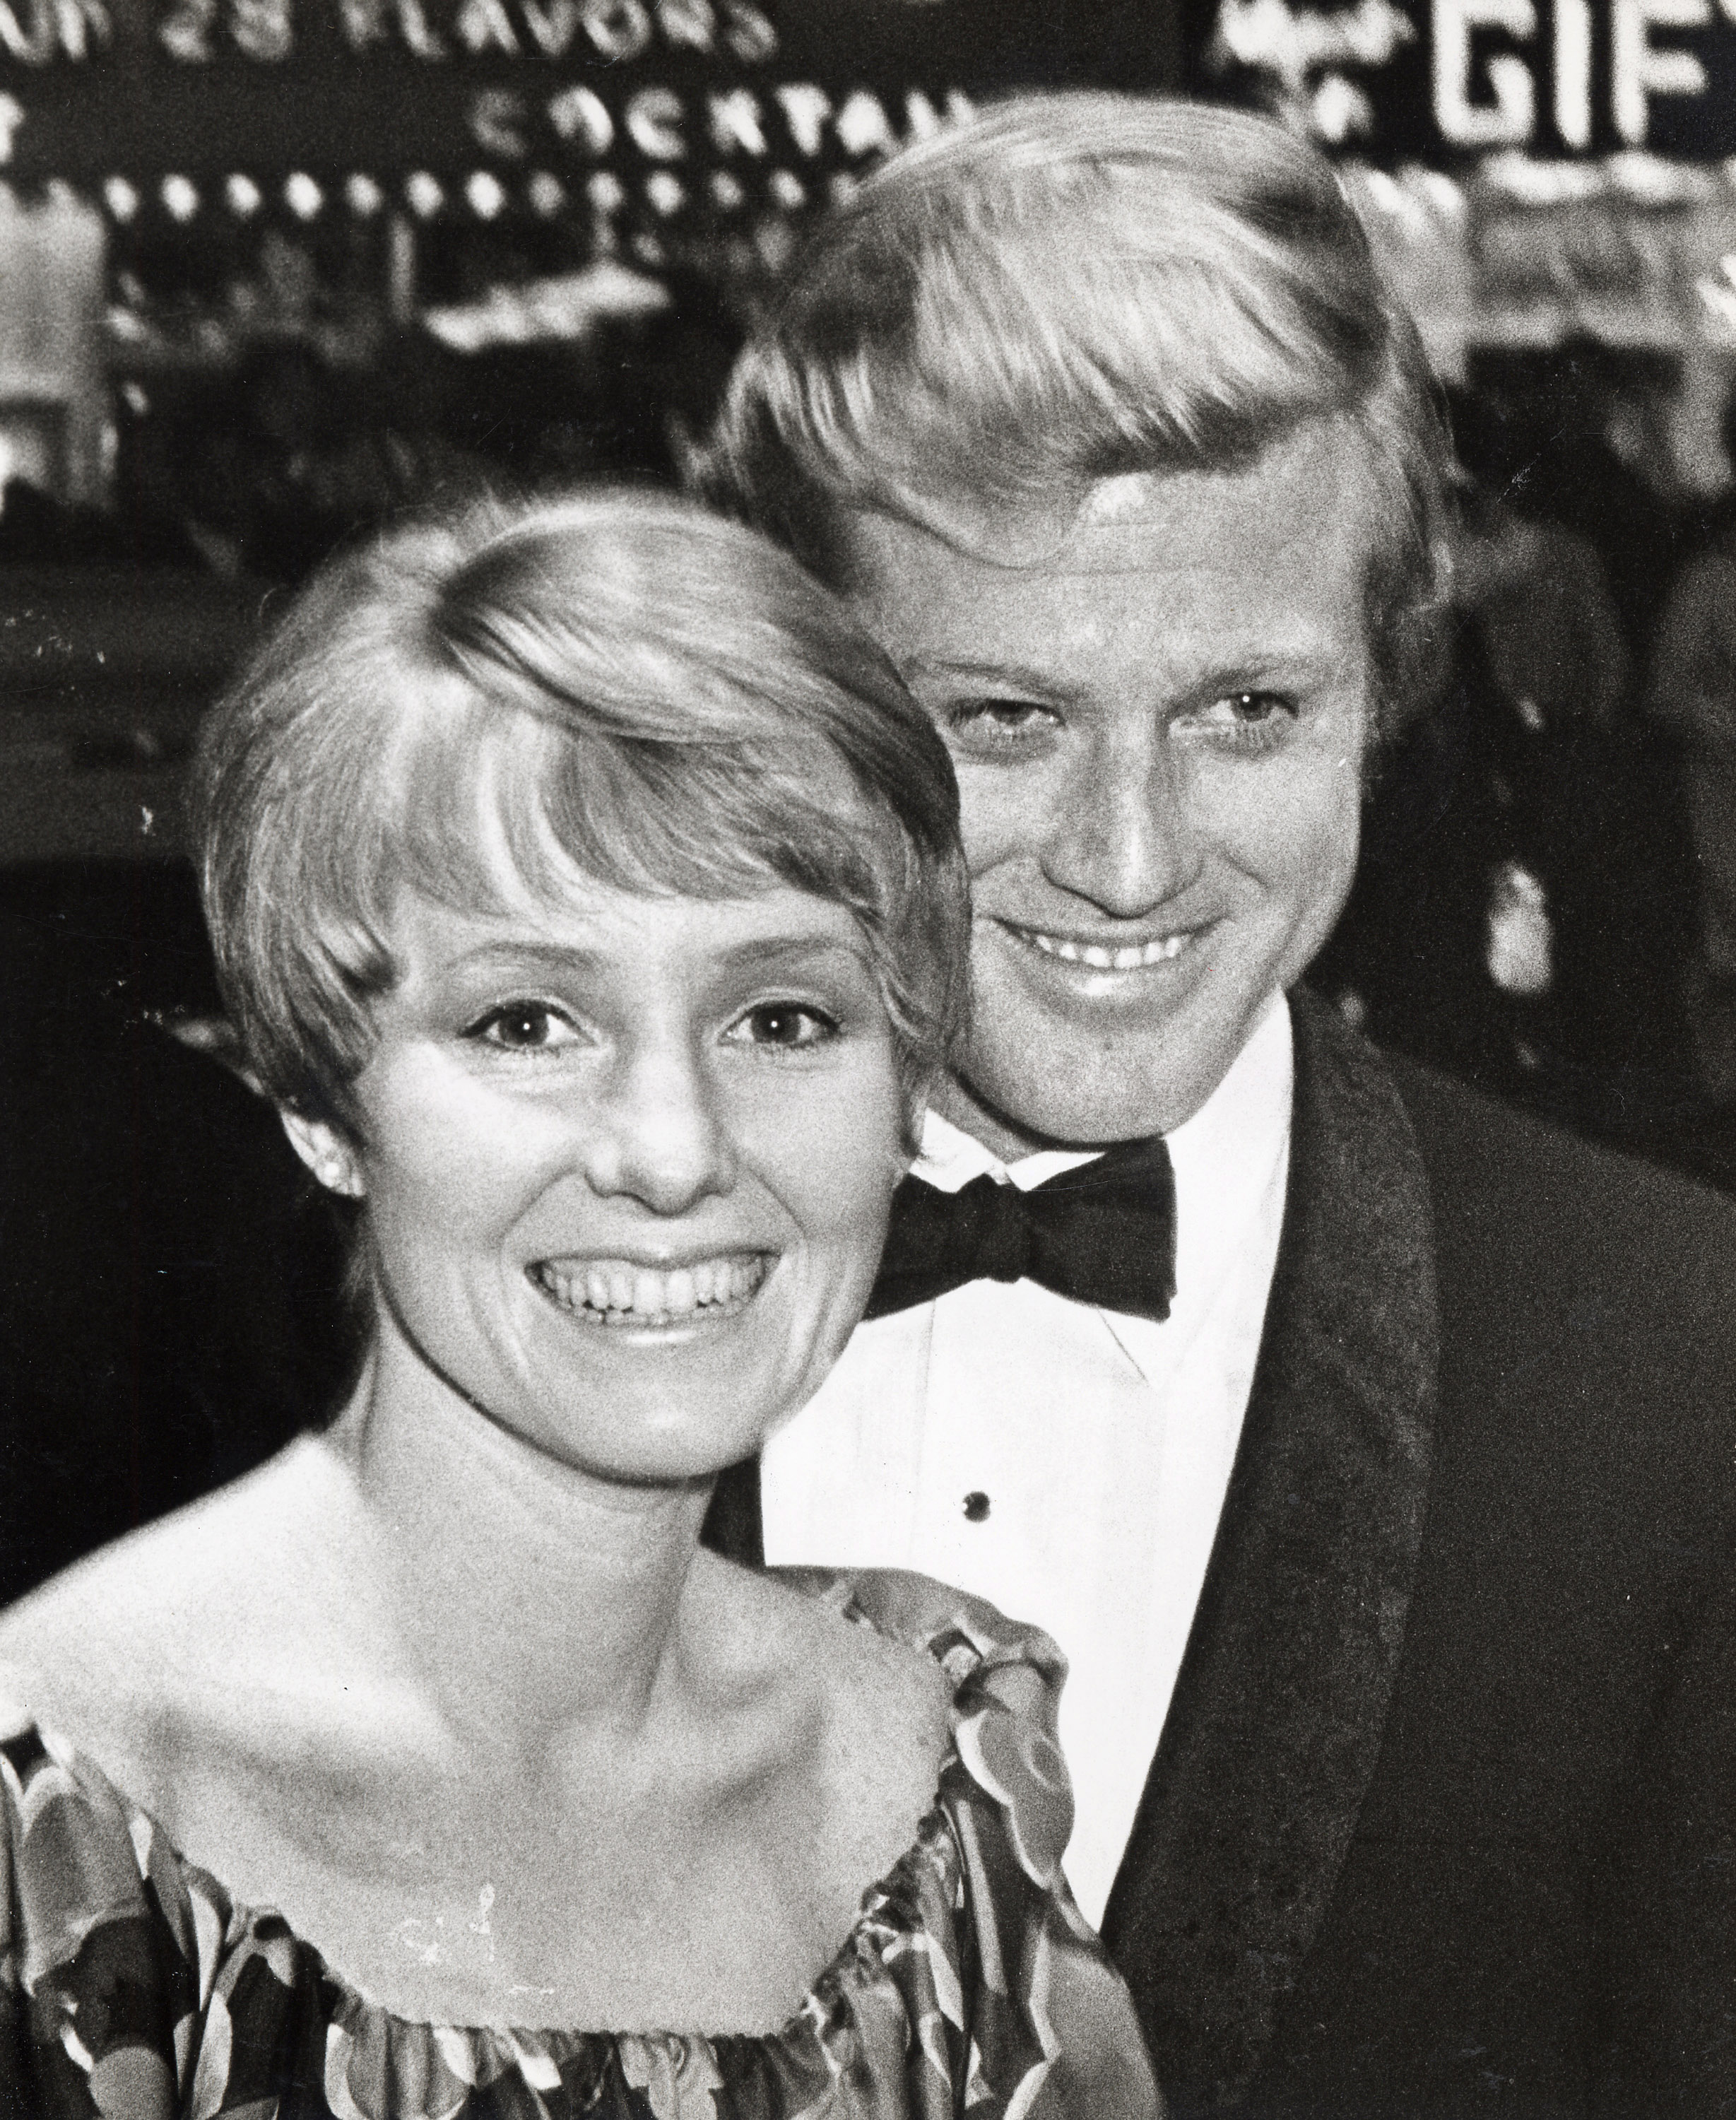 Robert Redford and Lola Redford at the "Barefoot in the Park" premiere in New York City on May 24, 1967. | Source: Getty Images